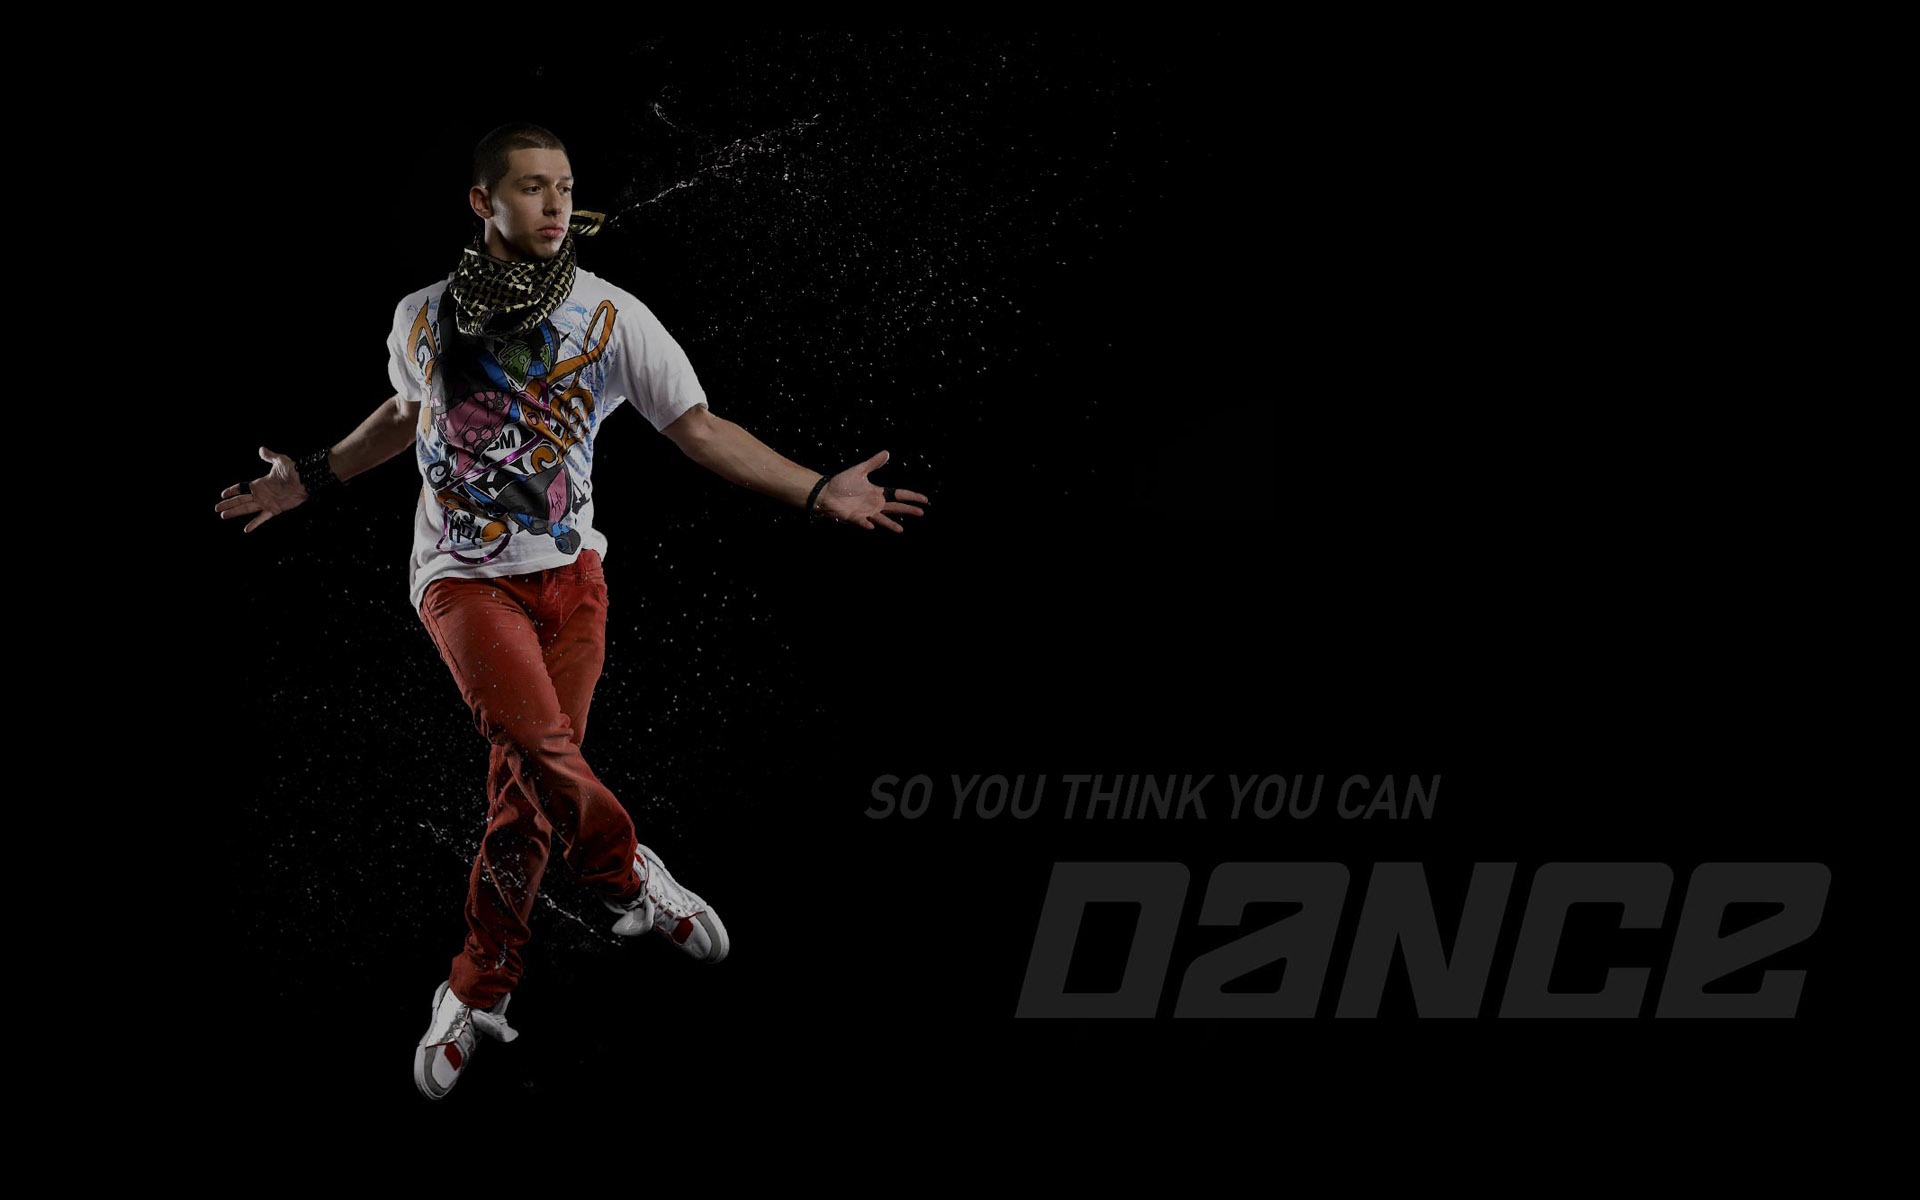 So You Think You Can Dance 舞林争霸 壁纸(一)16 - 1920x1200